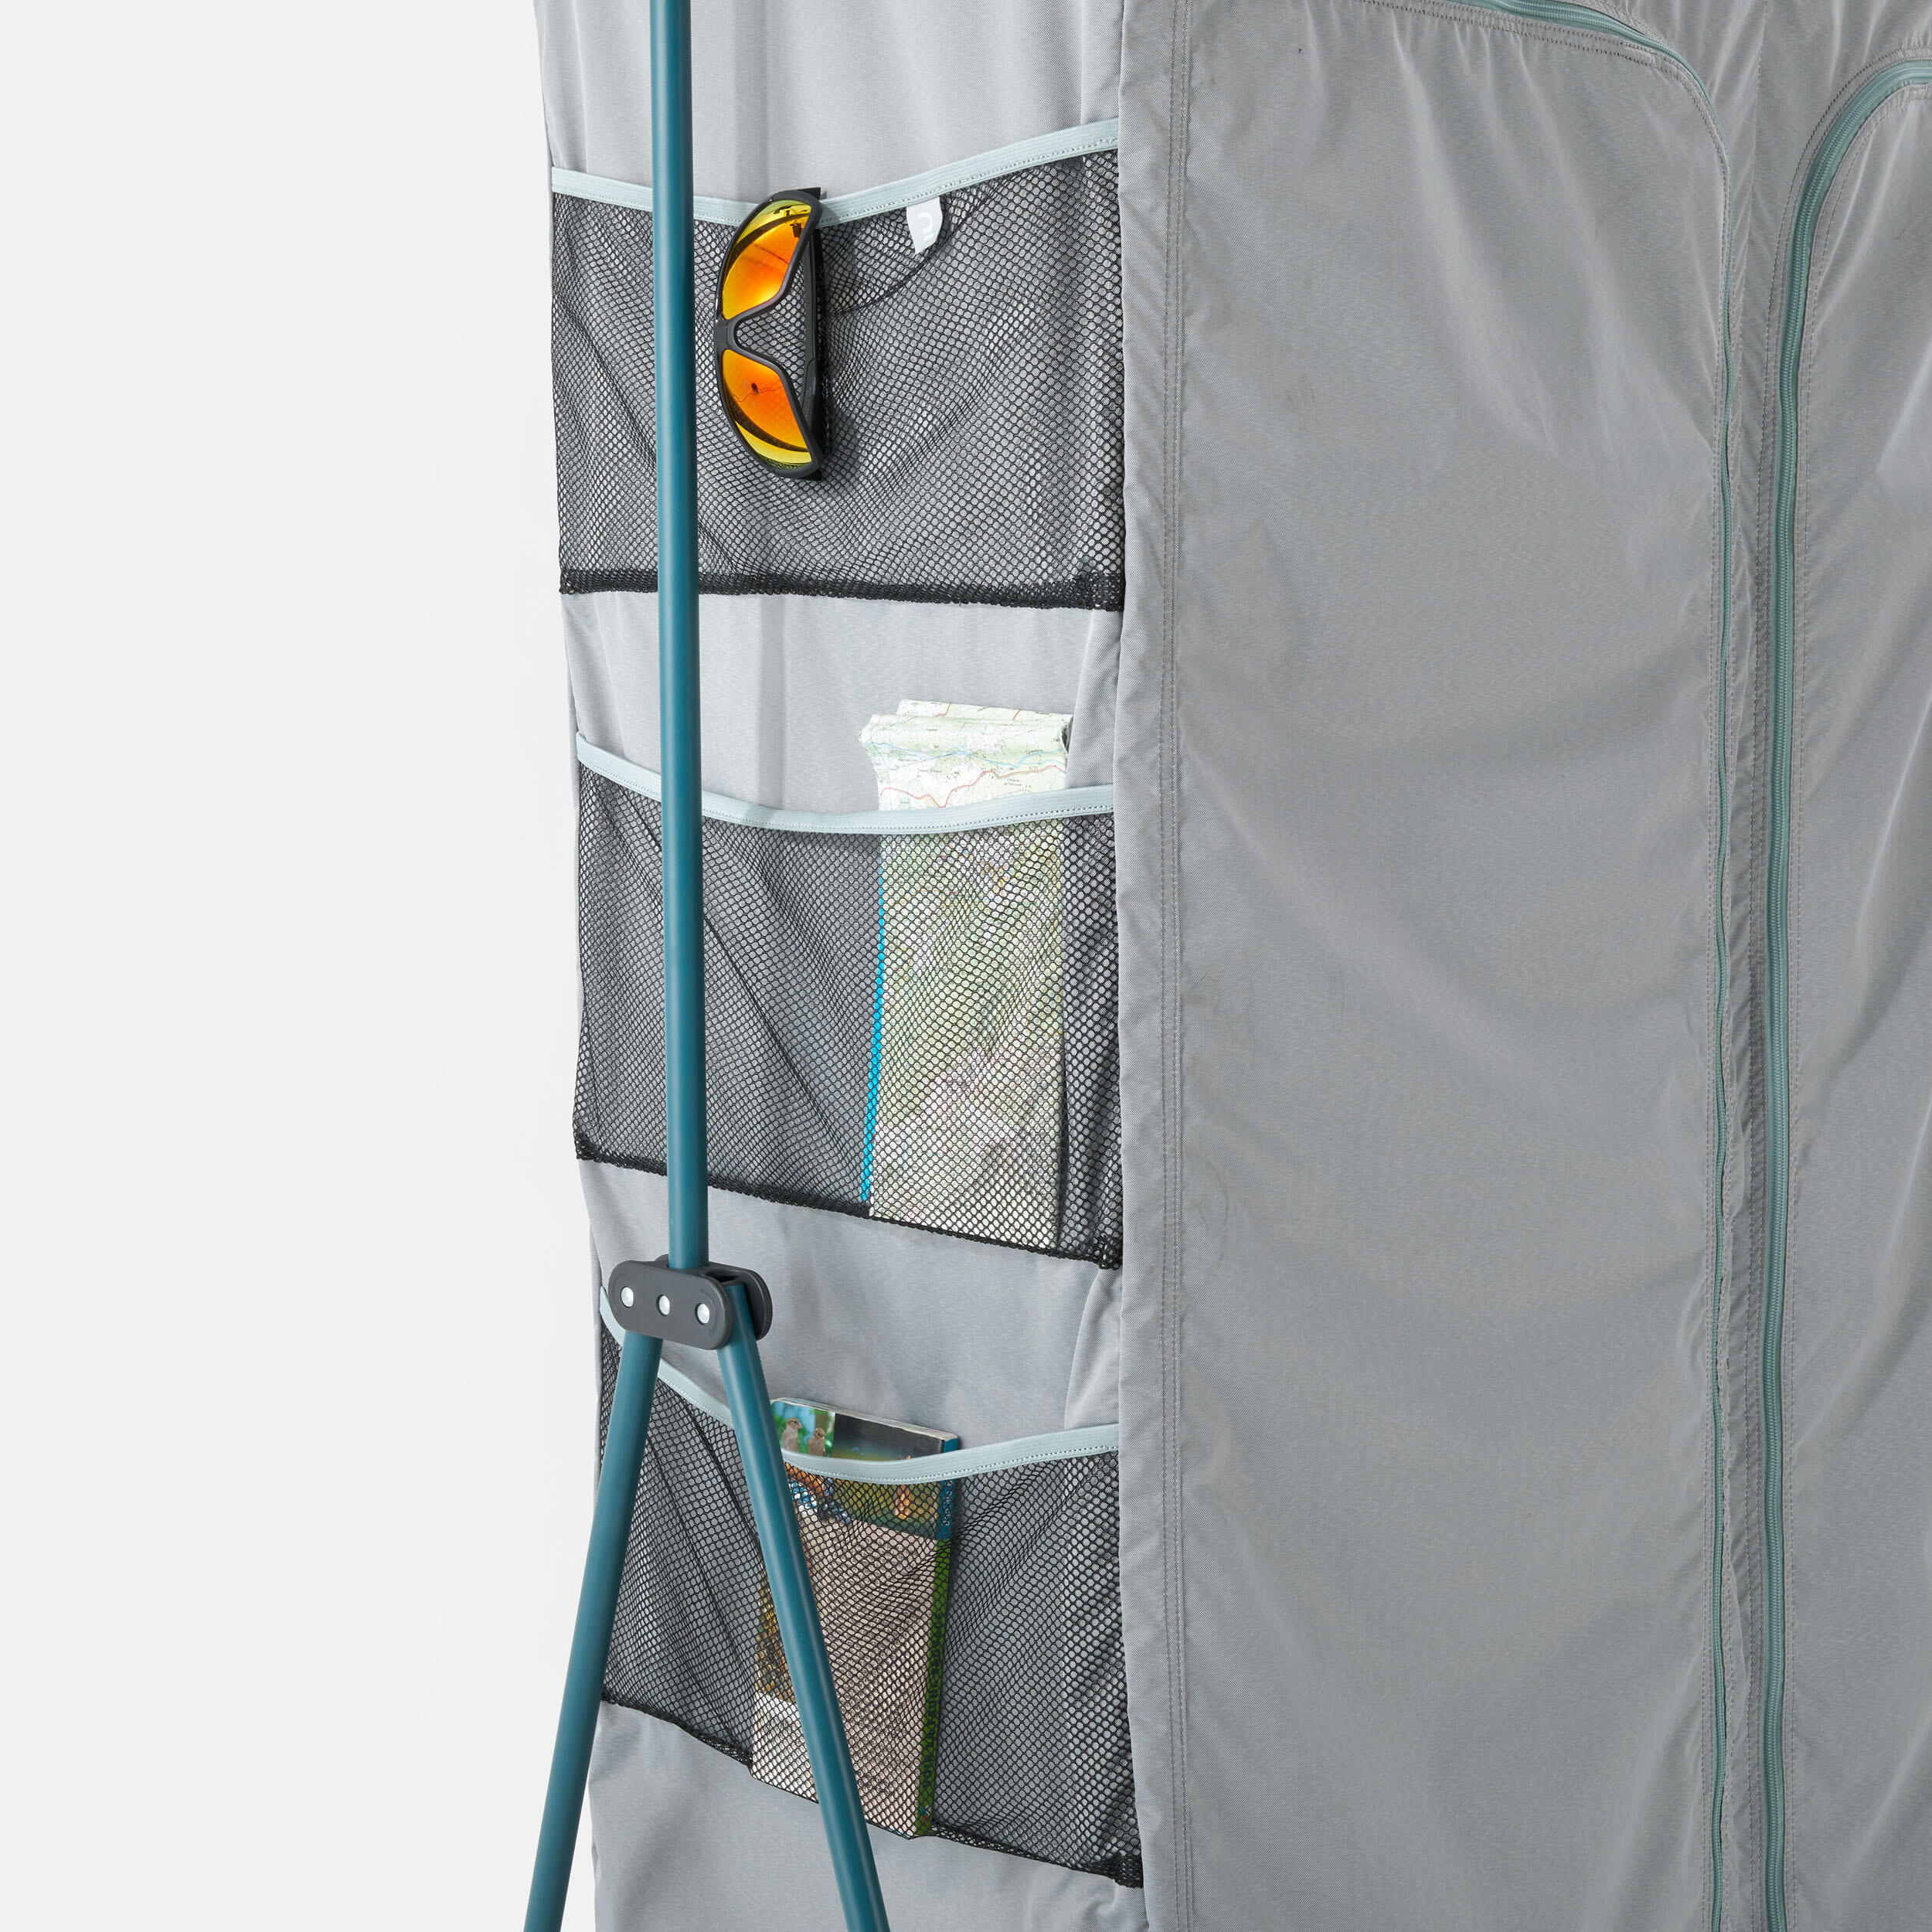 Large folding and compact camping wardrobe - Comfort 5/8